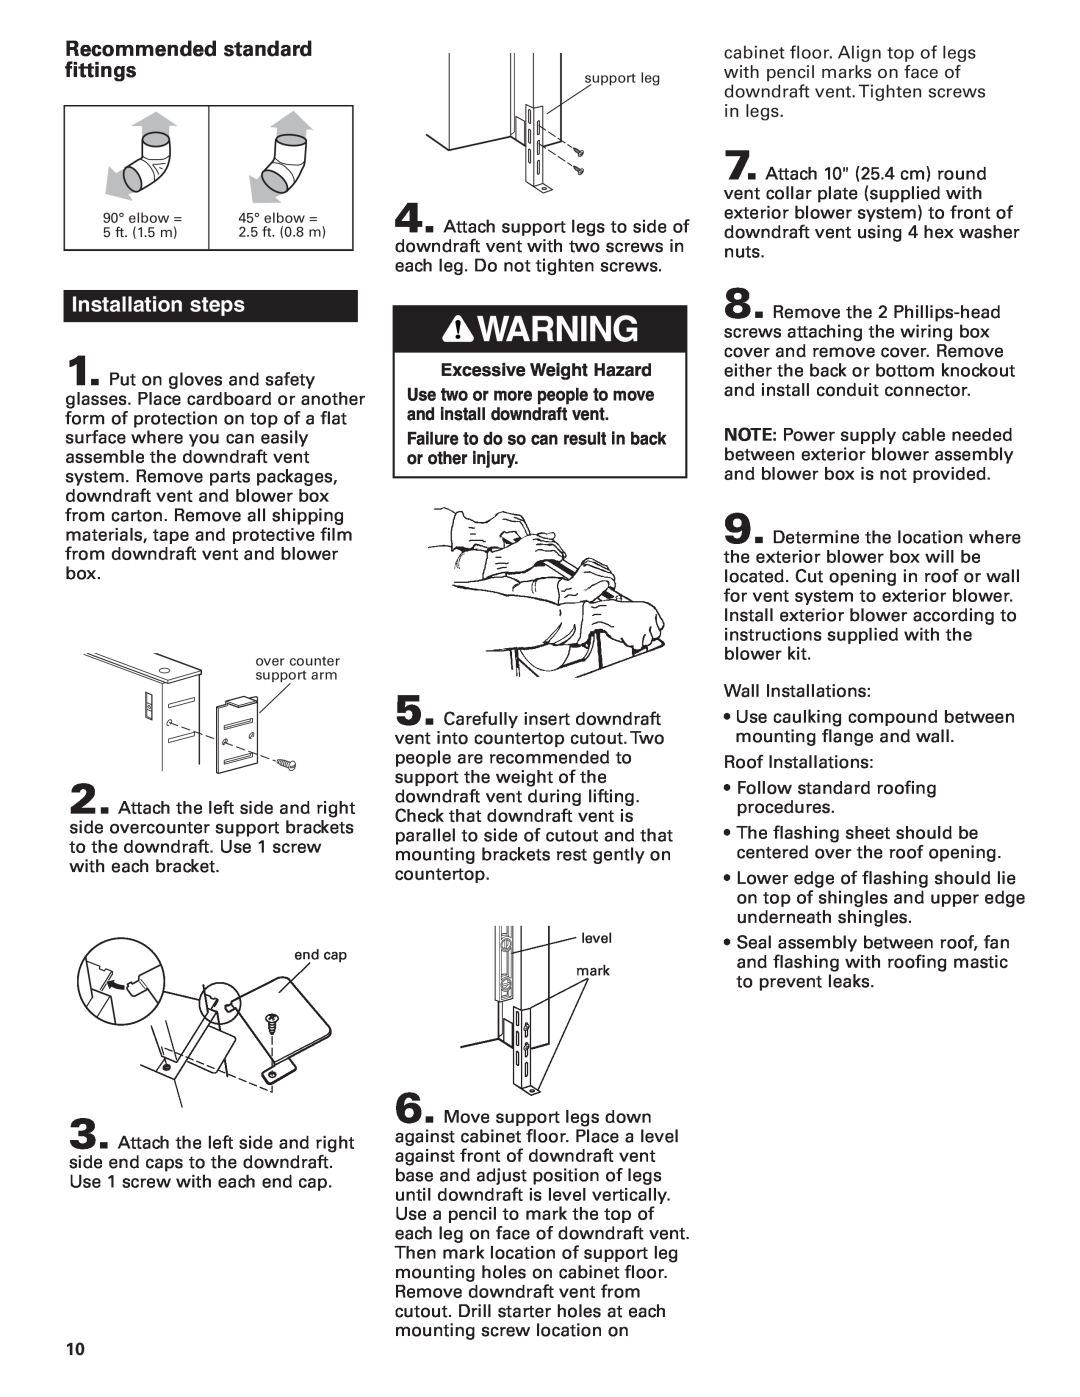 KitchenAid KPEU722M installation instructions Recommended standard, fittings, Installation steps, support leg 